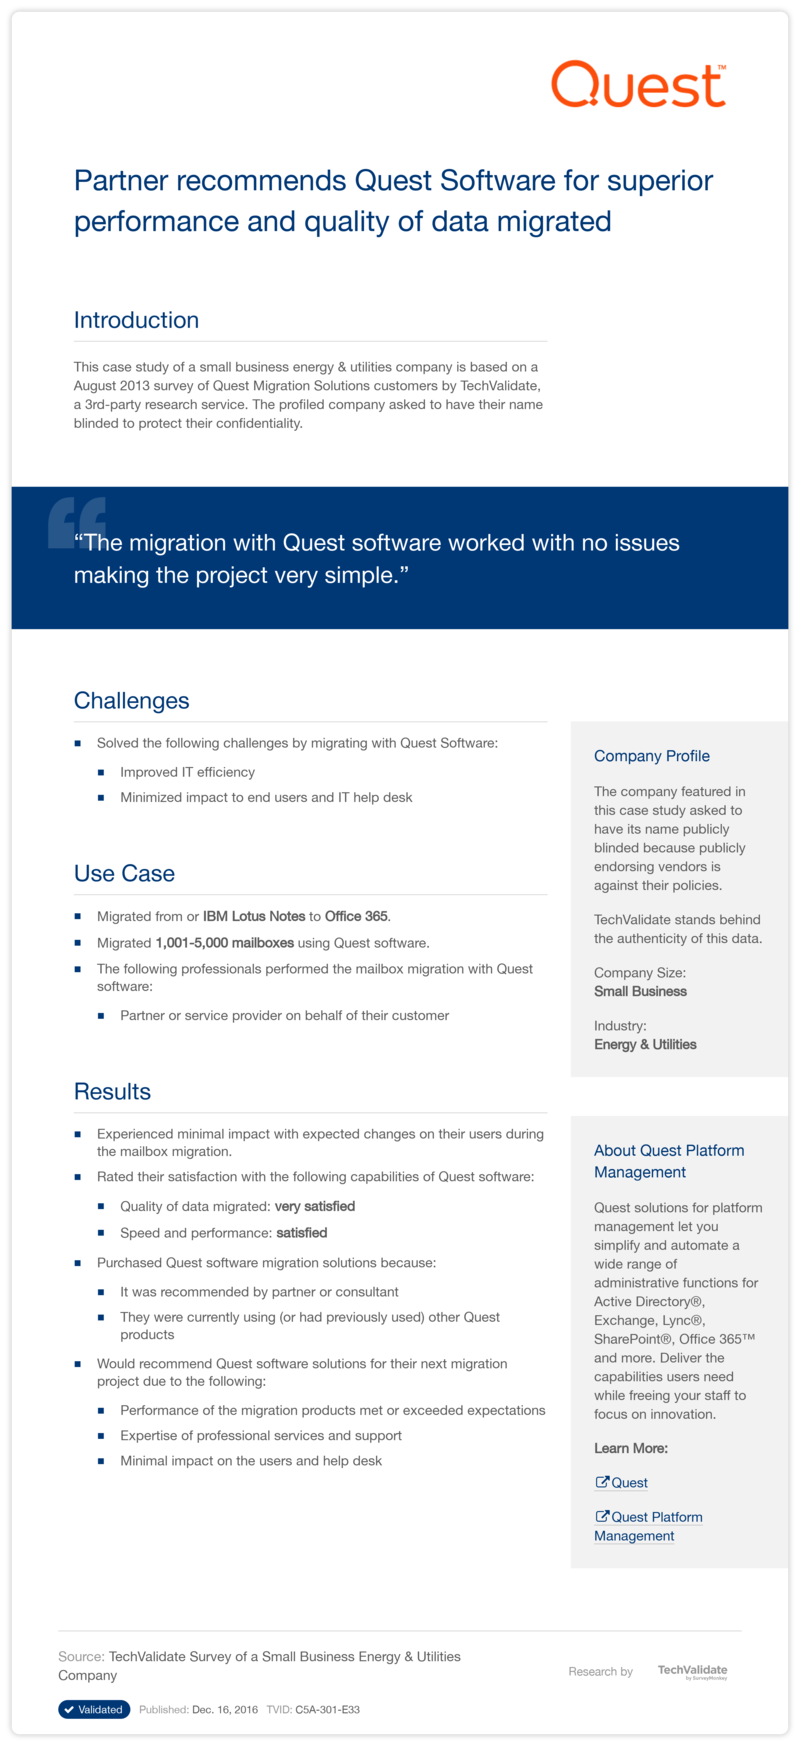 Partner recommends Quest Software for superior performance and quality of data migrated